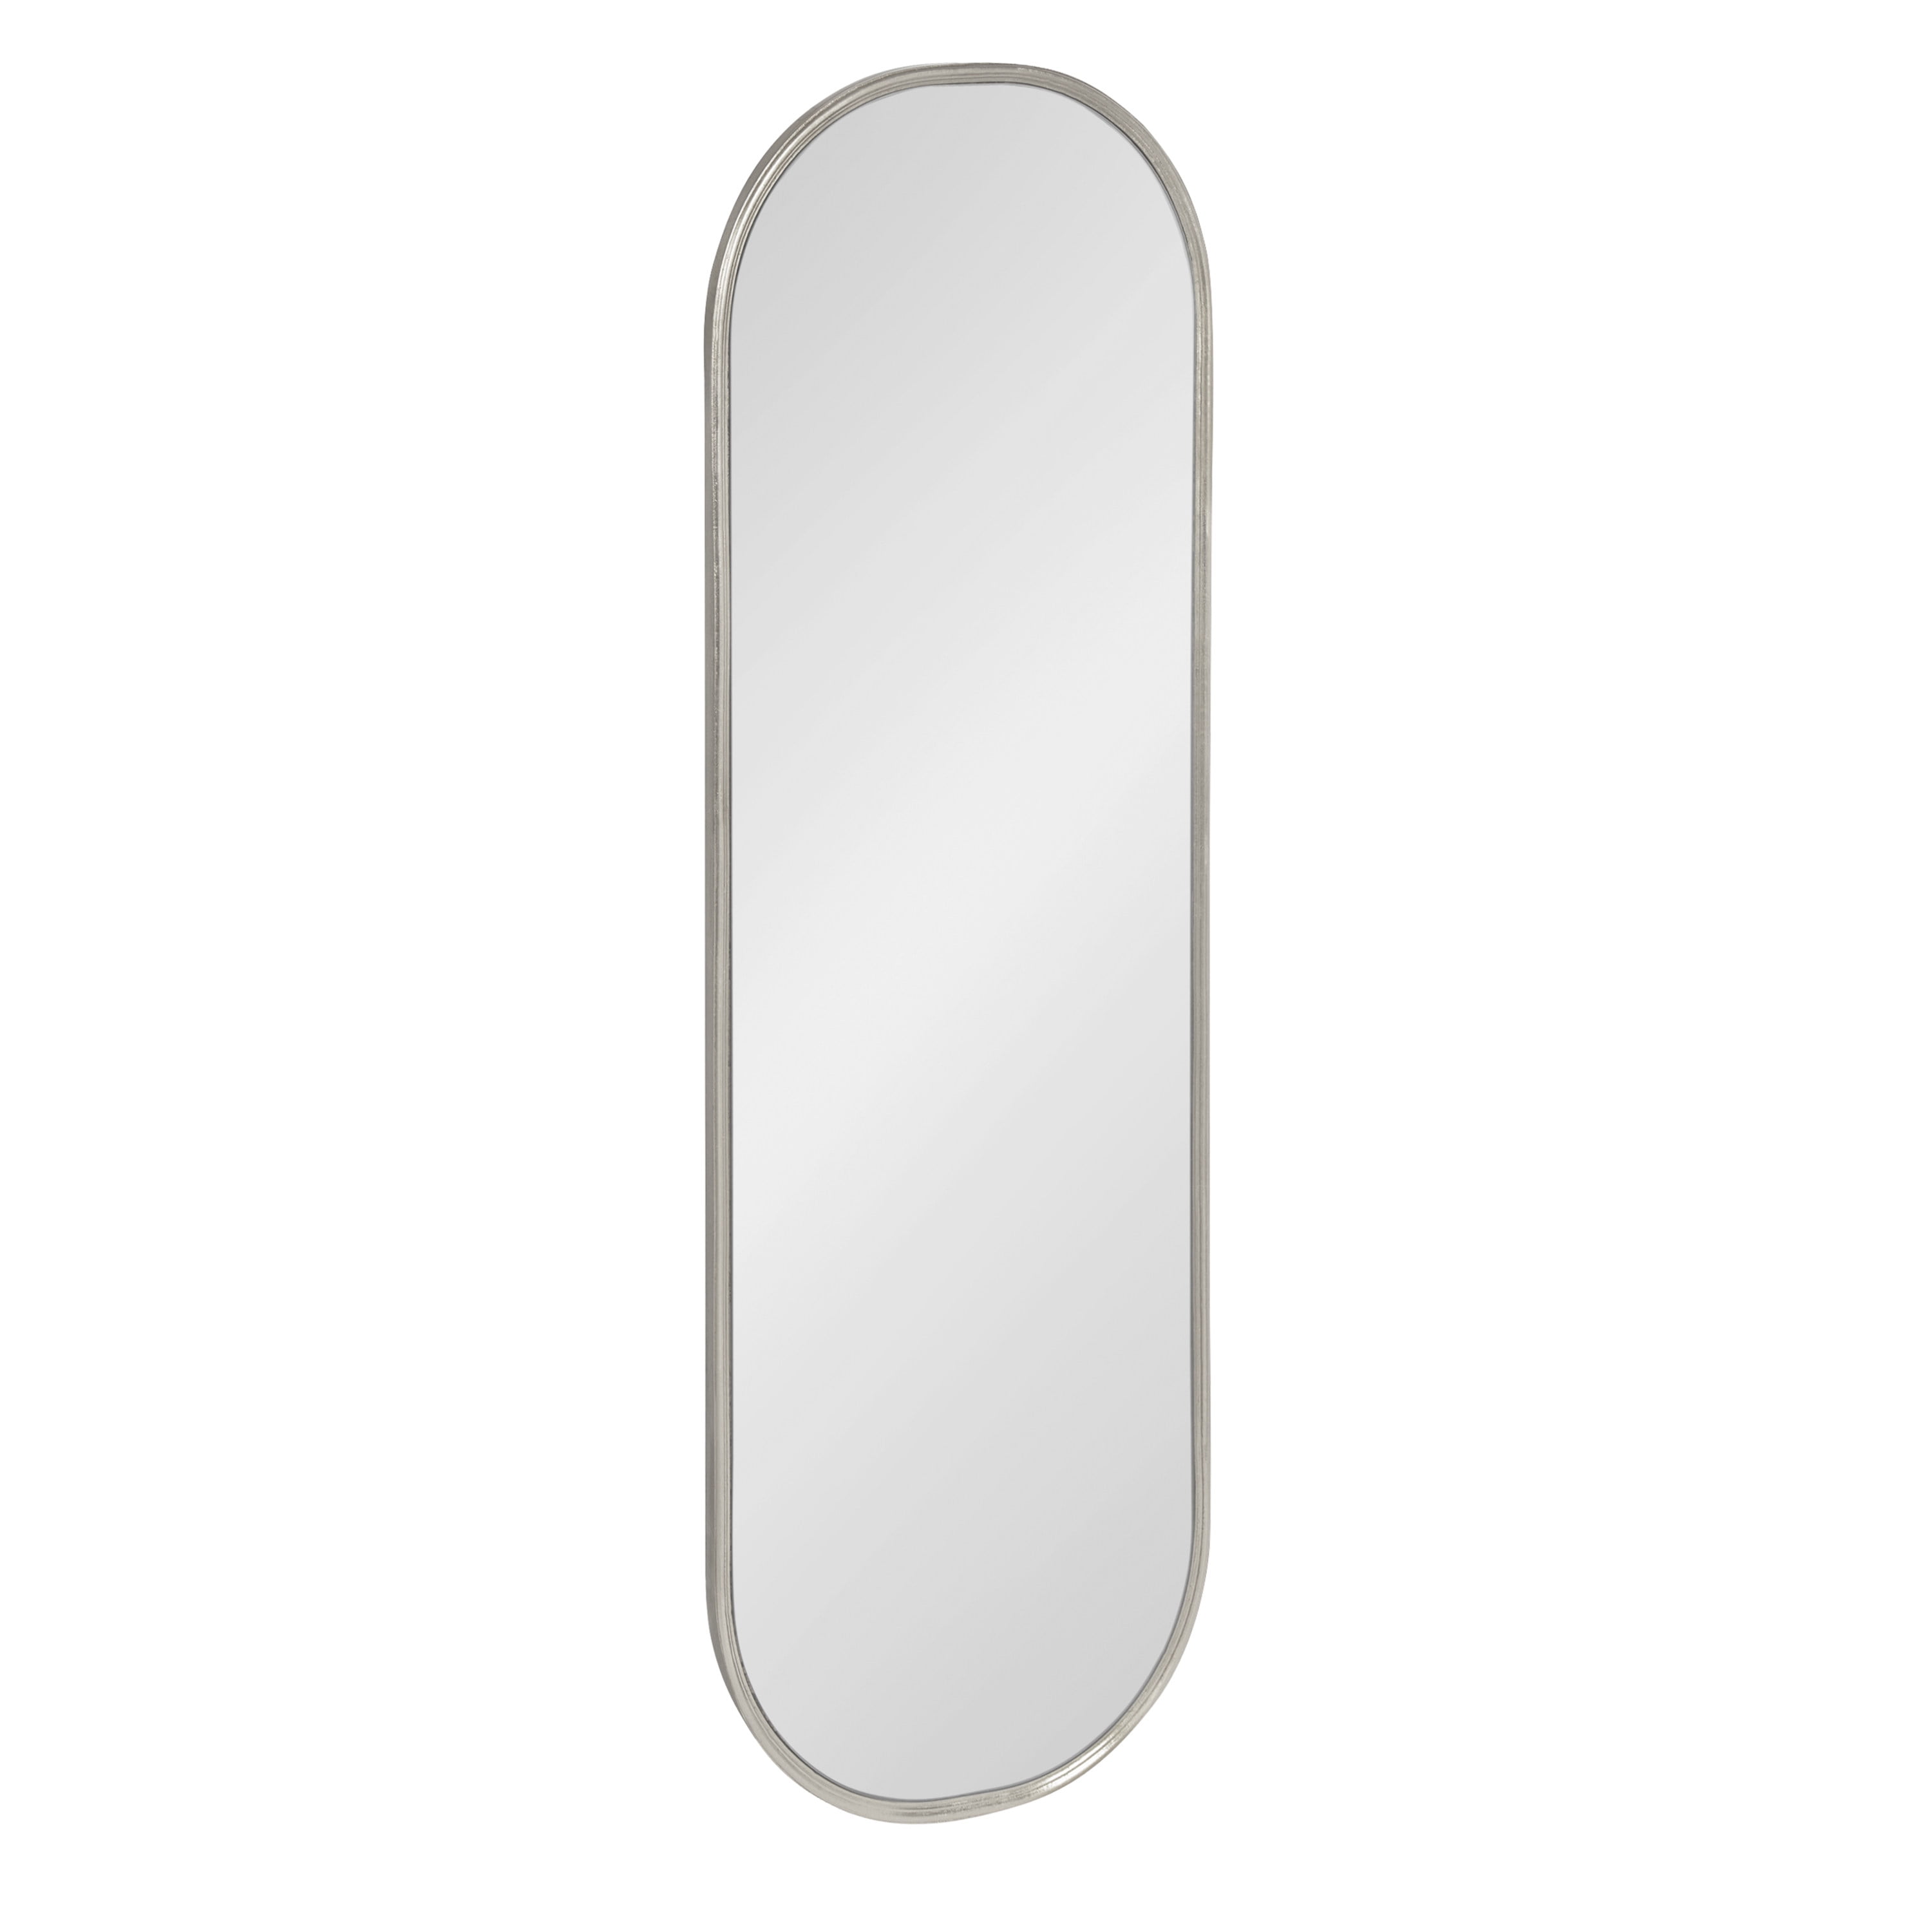 Kate and Laurel Caskill Modern Capsule Panel Mirror, 16 x 48, Silver,  Decorative Oval Full Length Accent Mirror for Wall